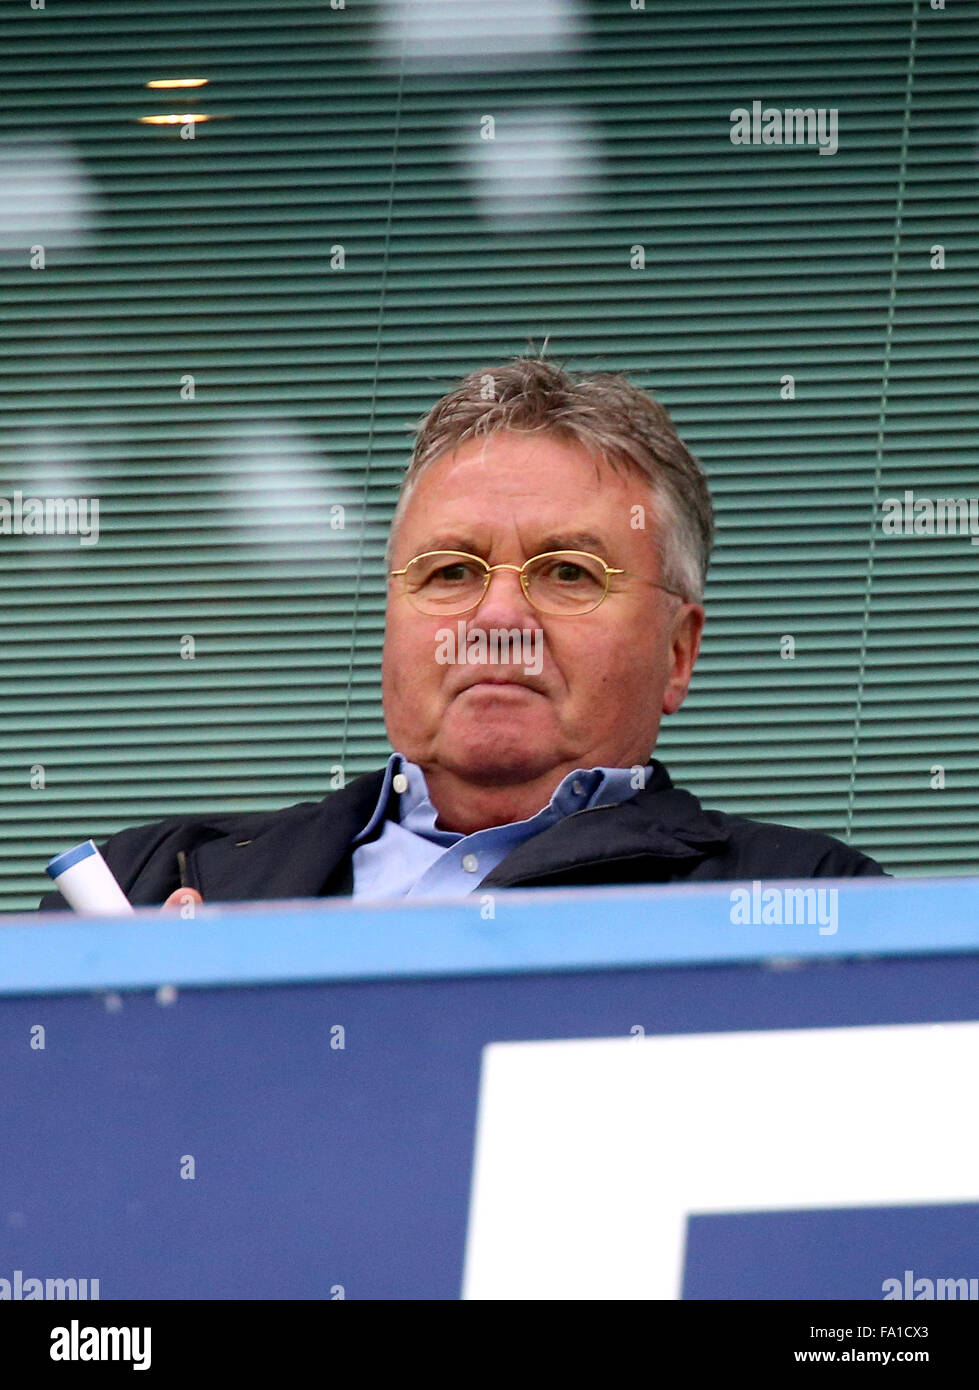 London, Britain. 19th Dec, 2015. Guus Hiddink watches the Barclays Premier League match between Chelsea and Sunderland in London, Britain, on Dec. 19, 2015. Guus Hiddink has been appointed first-team manager until the end of the season. © Han Yan/Xinhua/Alamy Live News Stock Photo